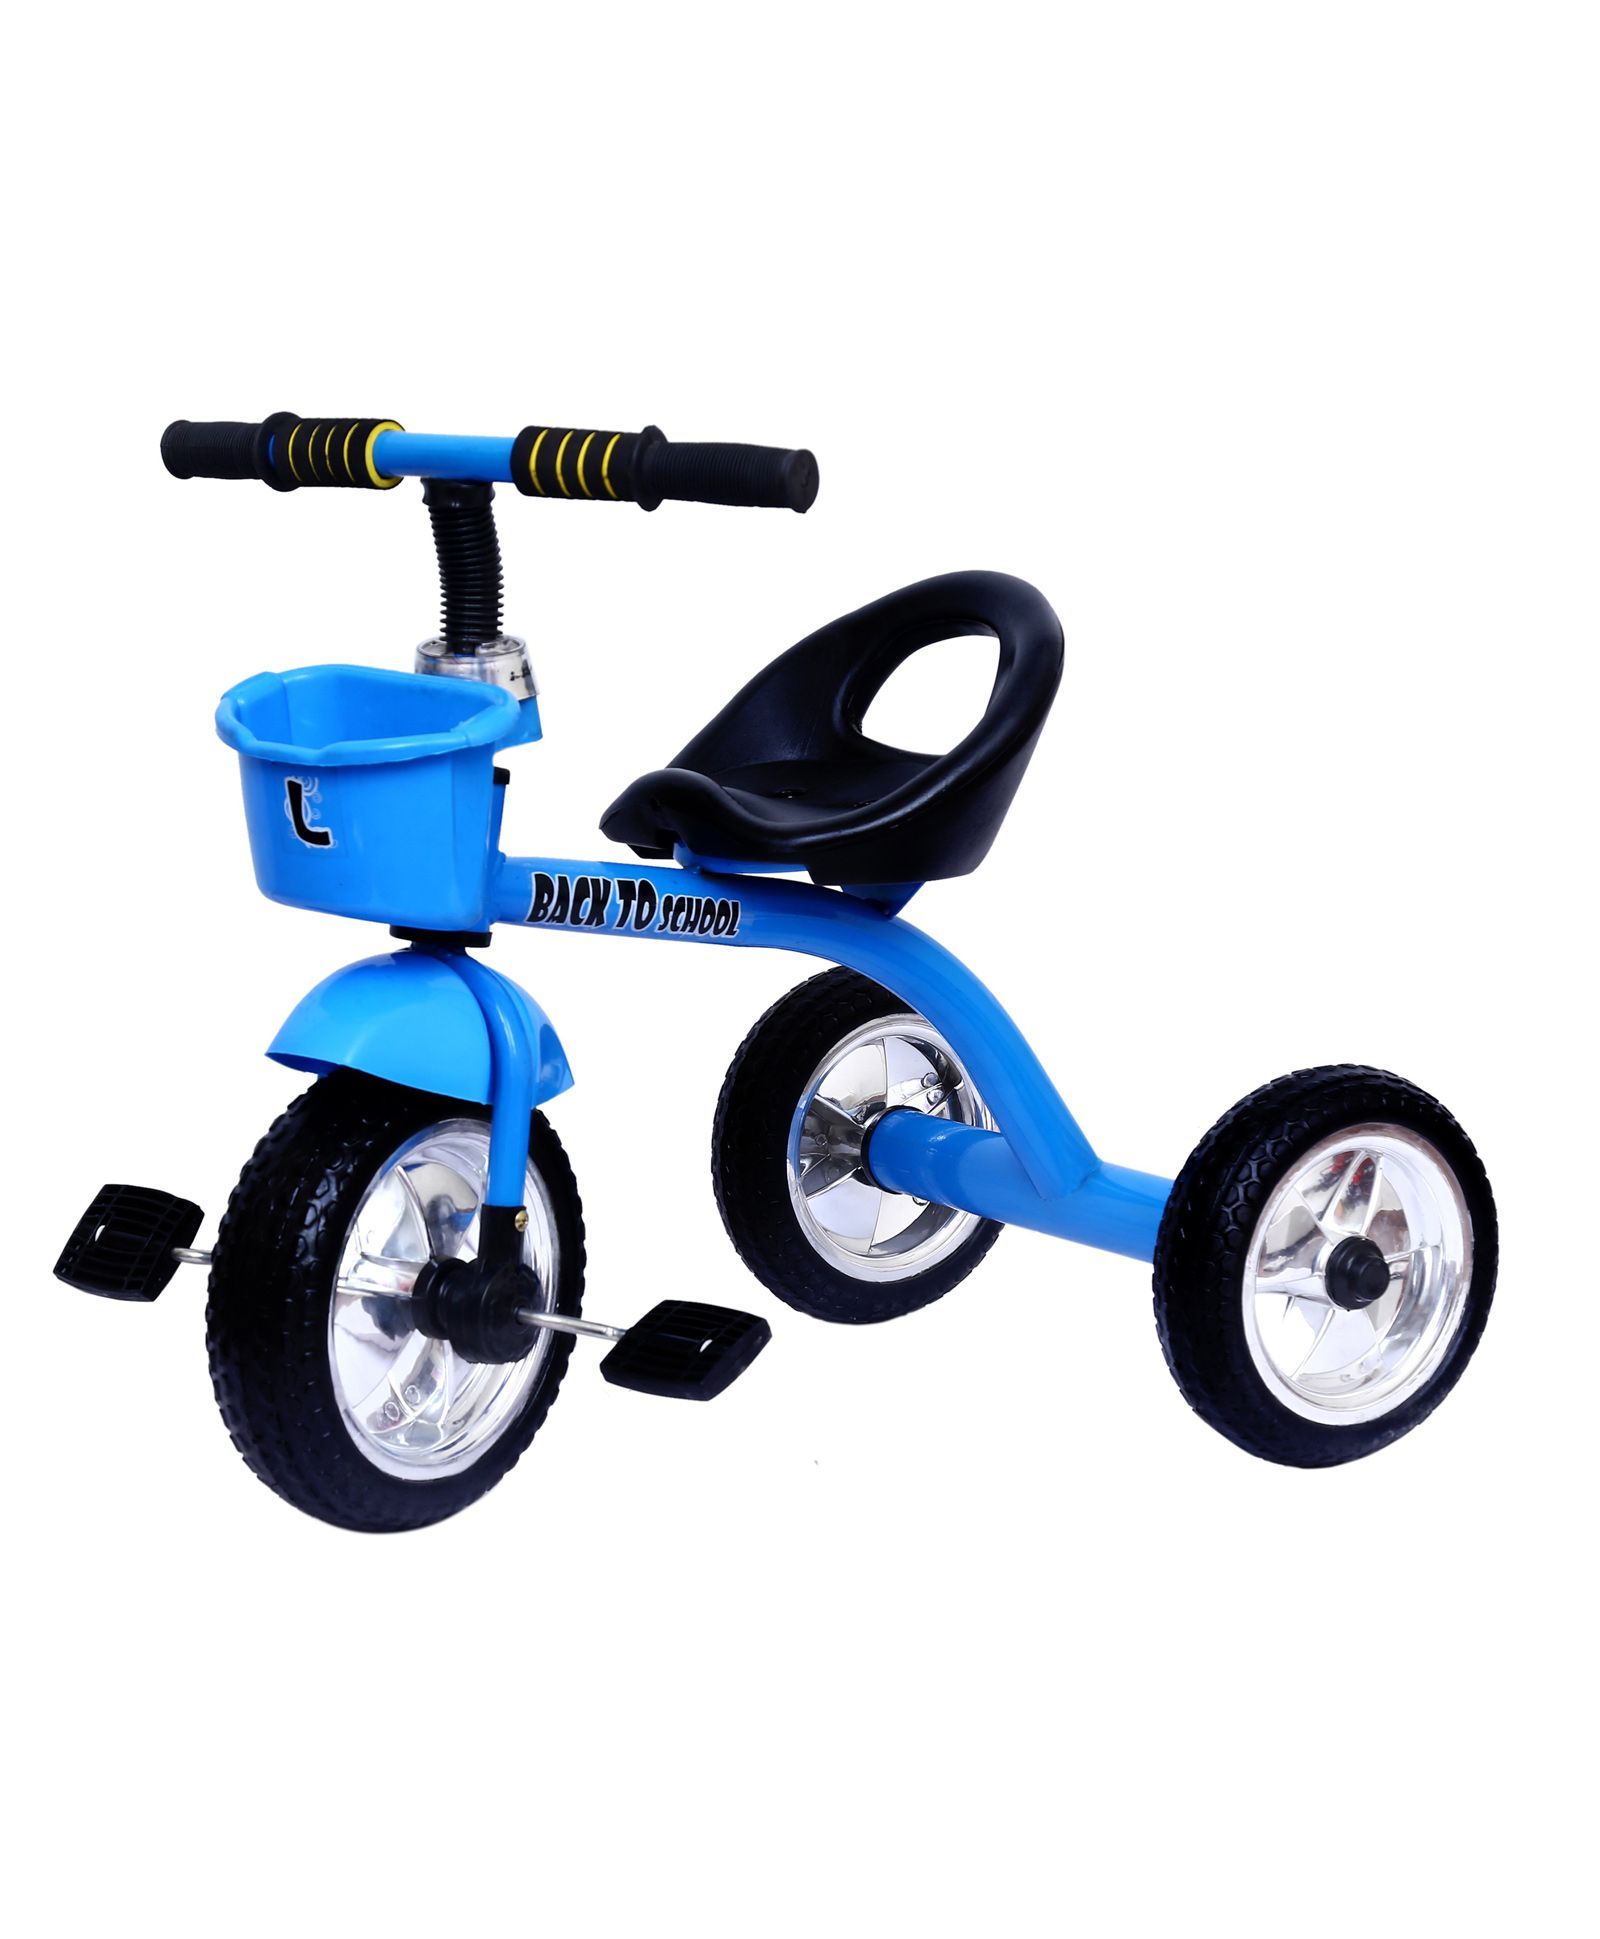 luusa tricycle